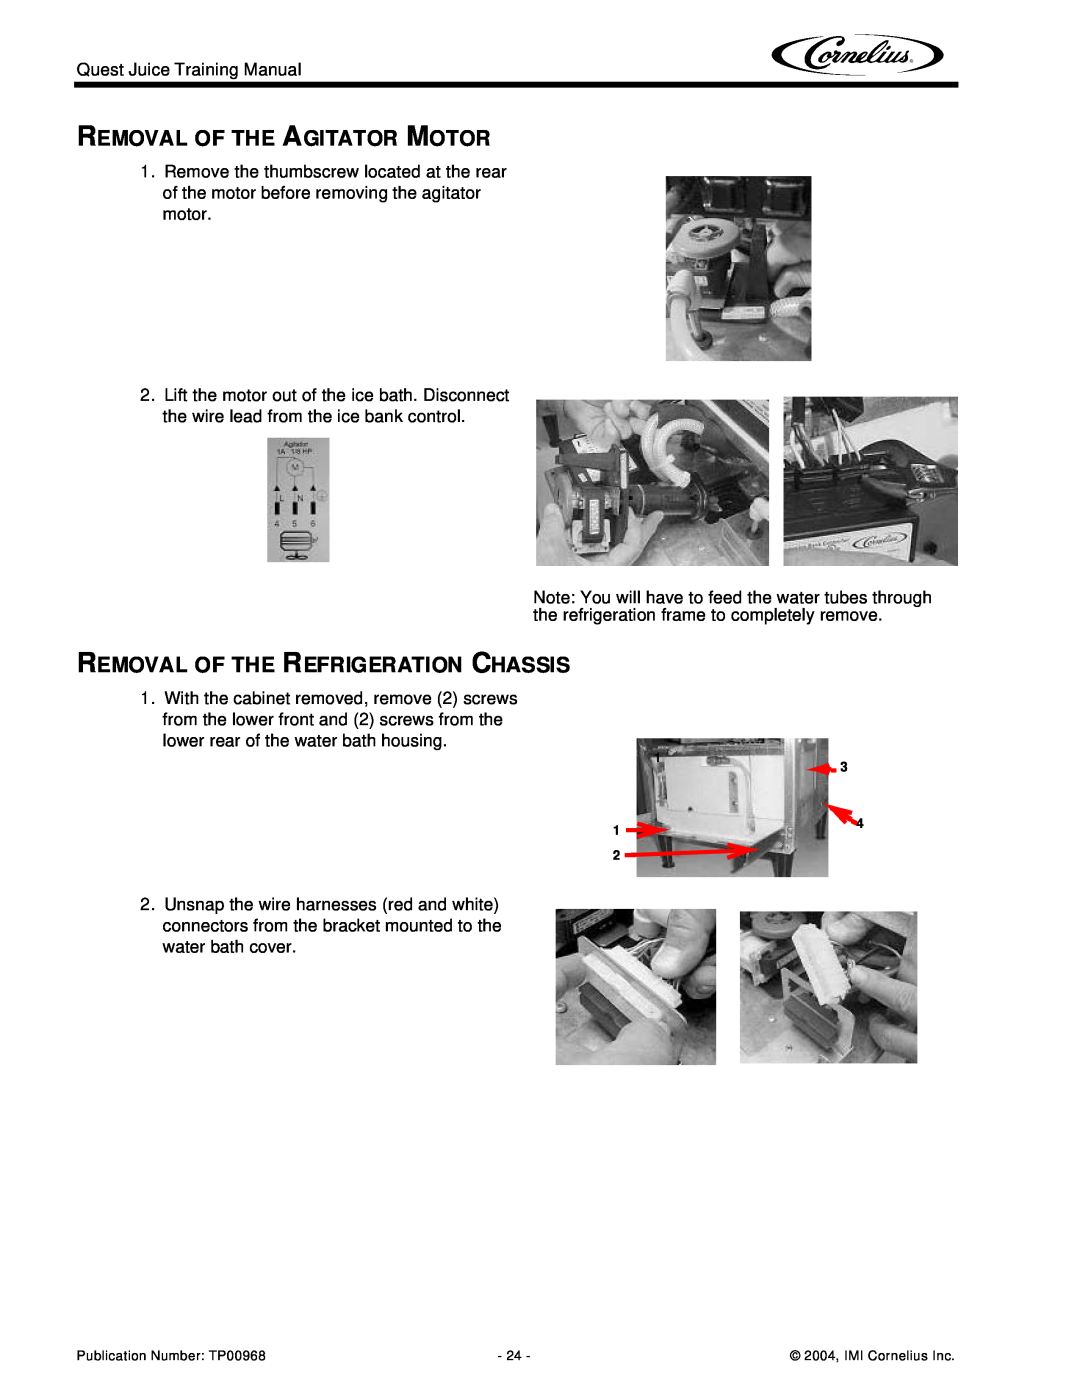 Cornelius 4 Flavor, 2 Flavor manual Removal Of The Agitator Motor, Removal Of The Refrigeration Chassis 